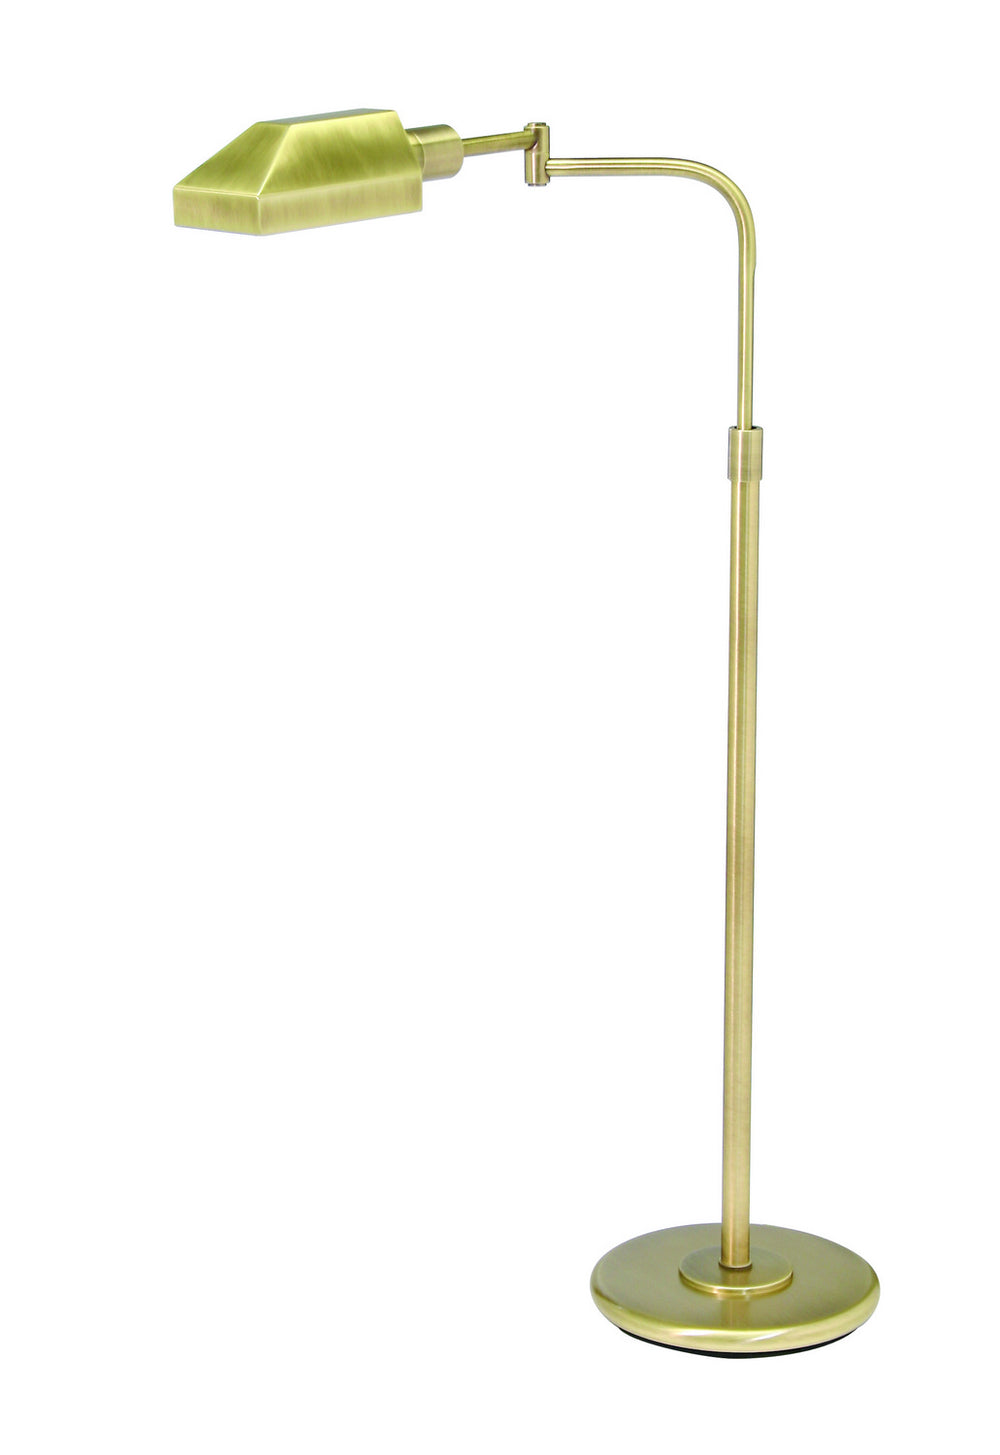 House of Troy - PH100-71-J - One Light Floor Lamp - Home/Office - Antique Brass